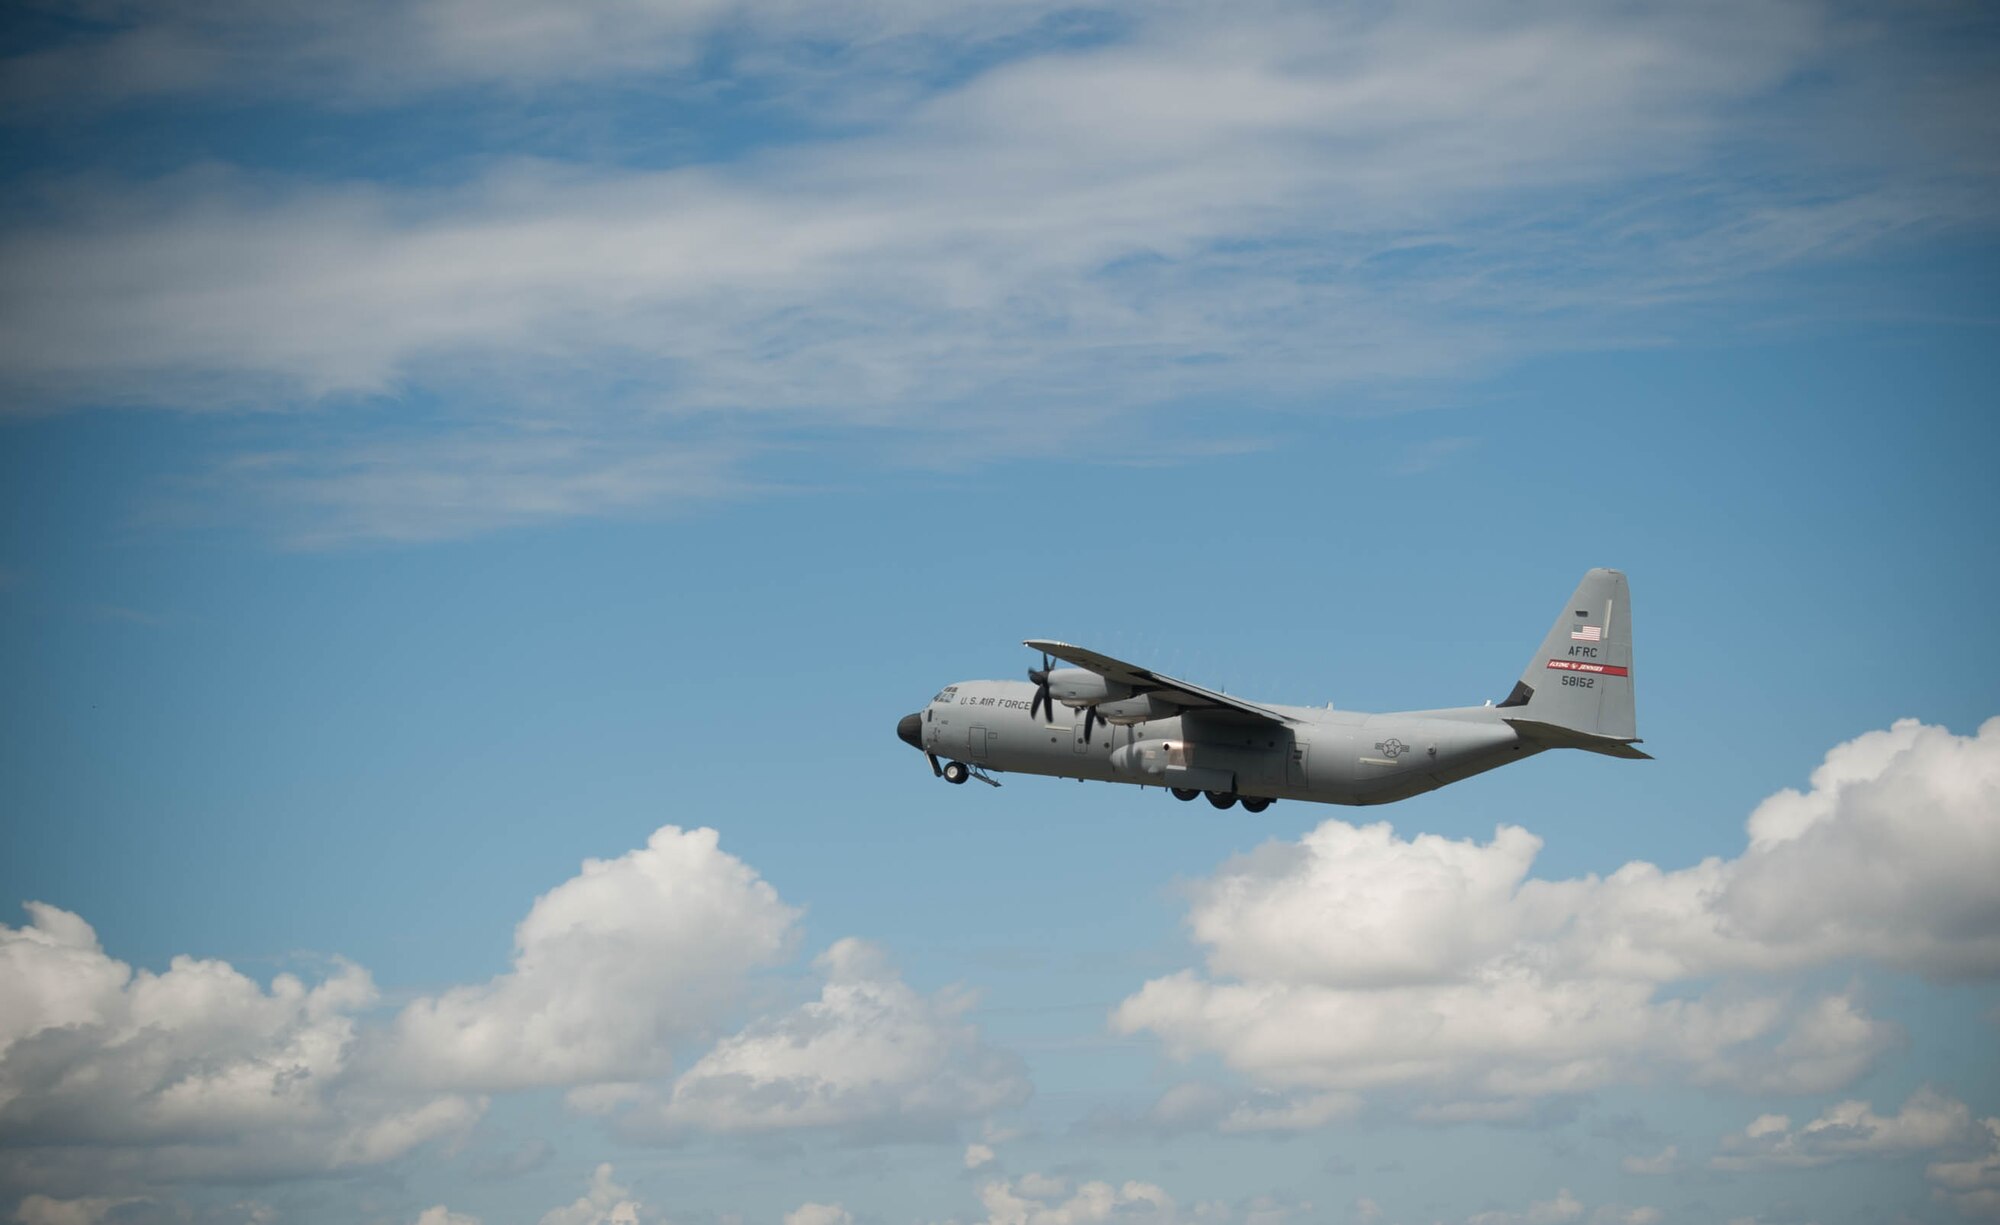 A C-130J Super Hercules from the 815th Airlift Squadron takes off from Keesler Air Force Base as part of a four-ship formation Sept. 11. This formation came after the activation of the new 803rd Aircraft Maintenance Squadron, which will be dedicated to the maintenance and repair of the 10 815th AS aircraft. (U.S. Air Force photo/Senior Airman Heather Heiney)